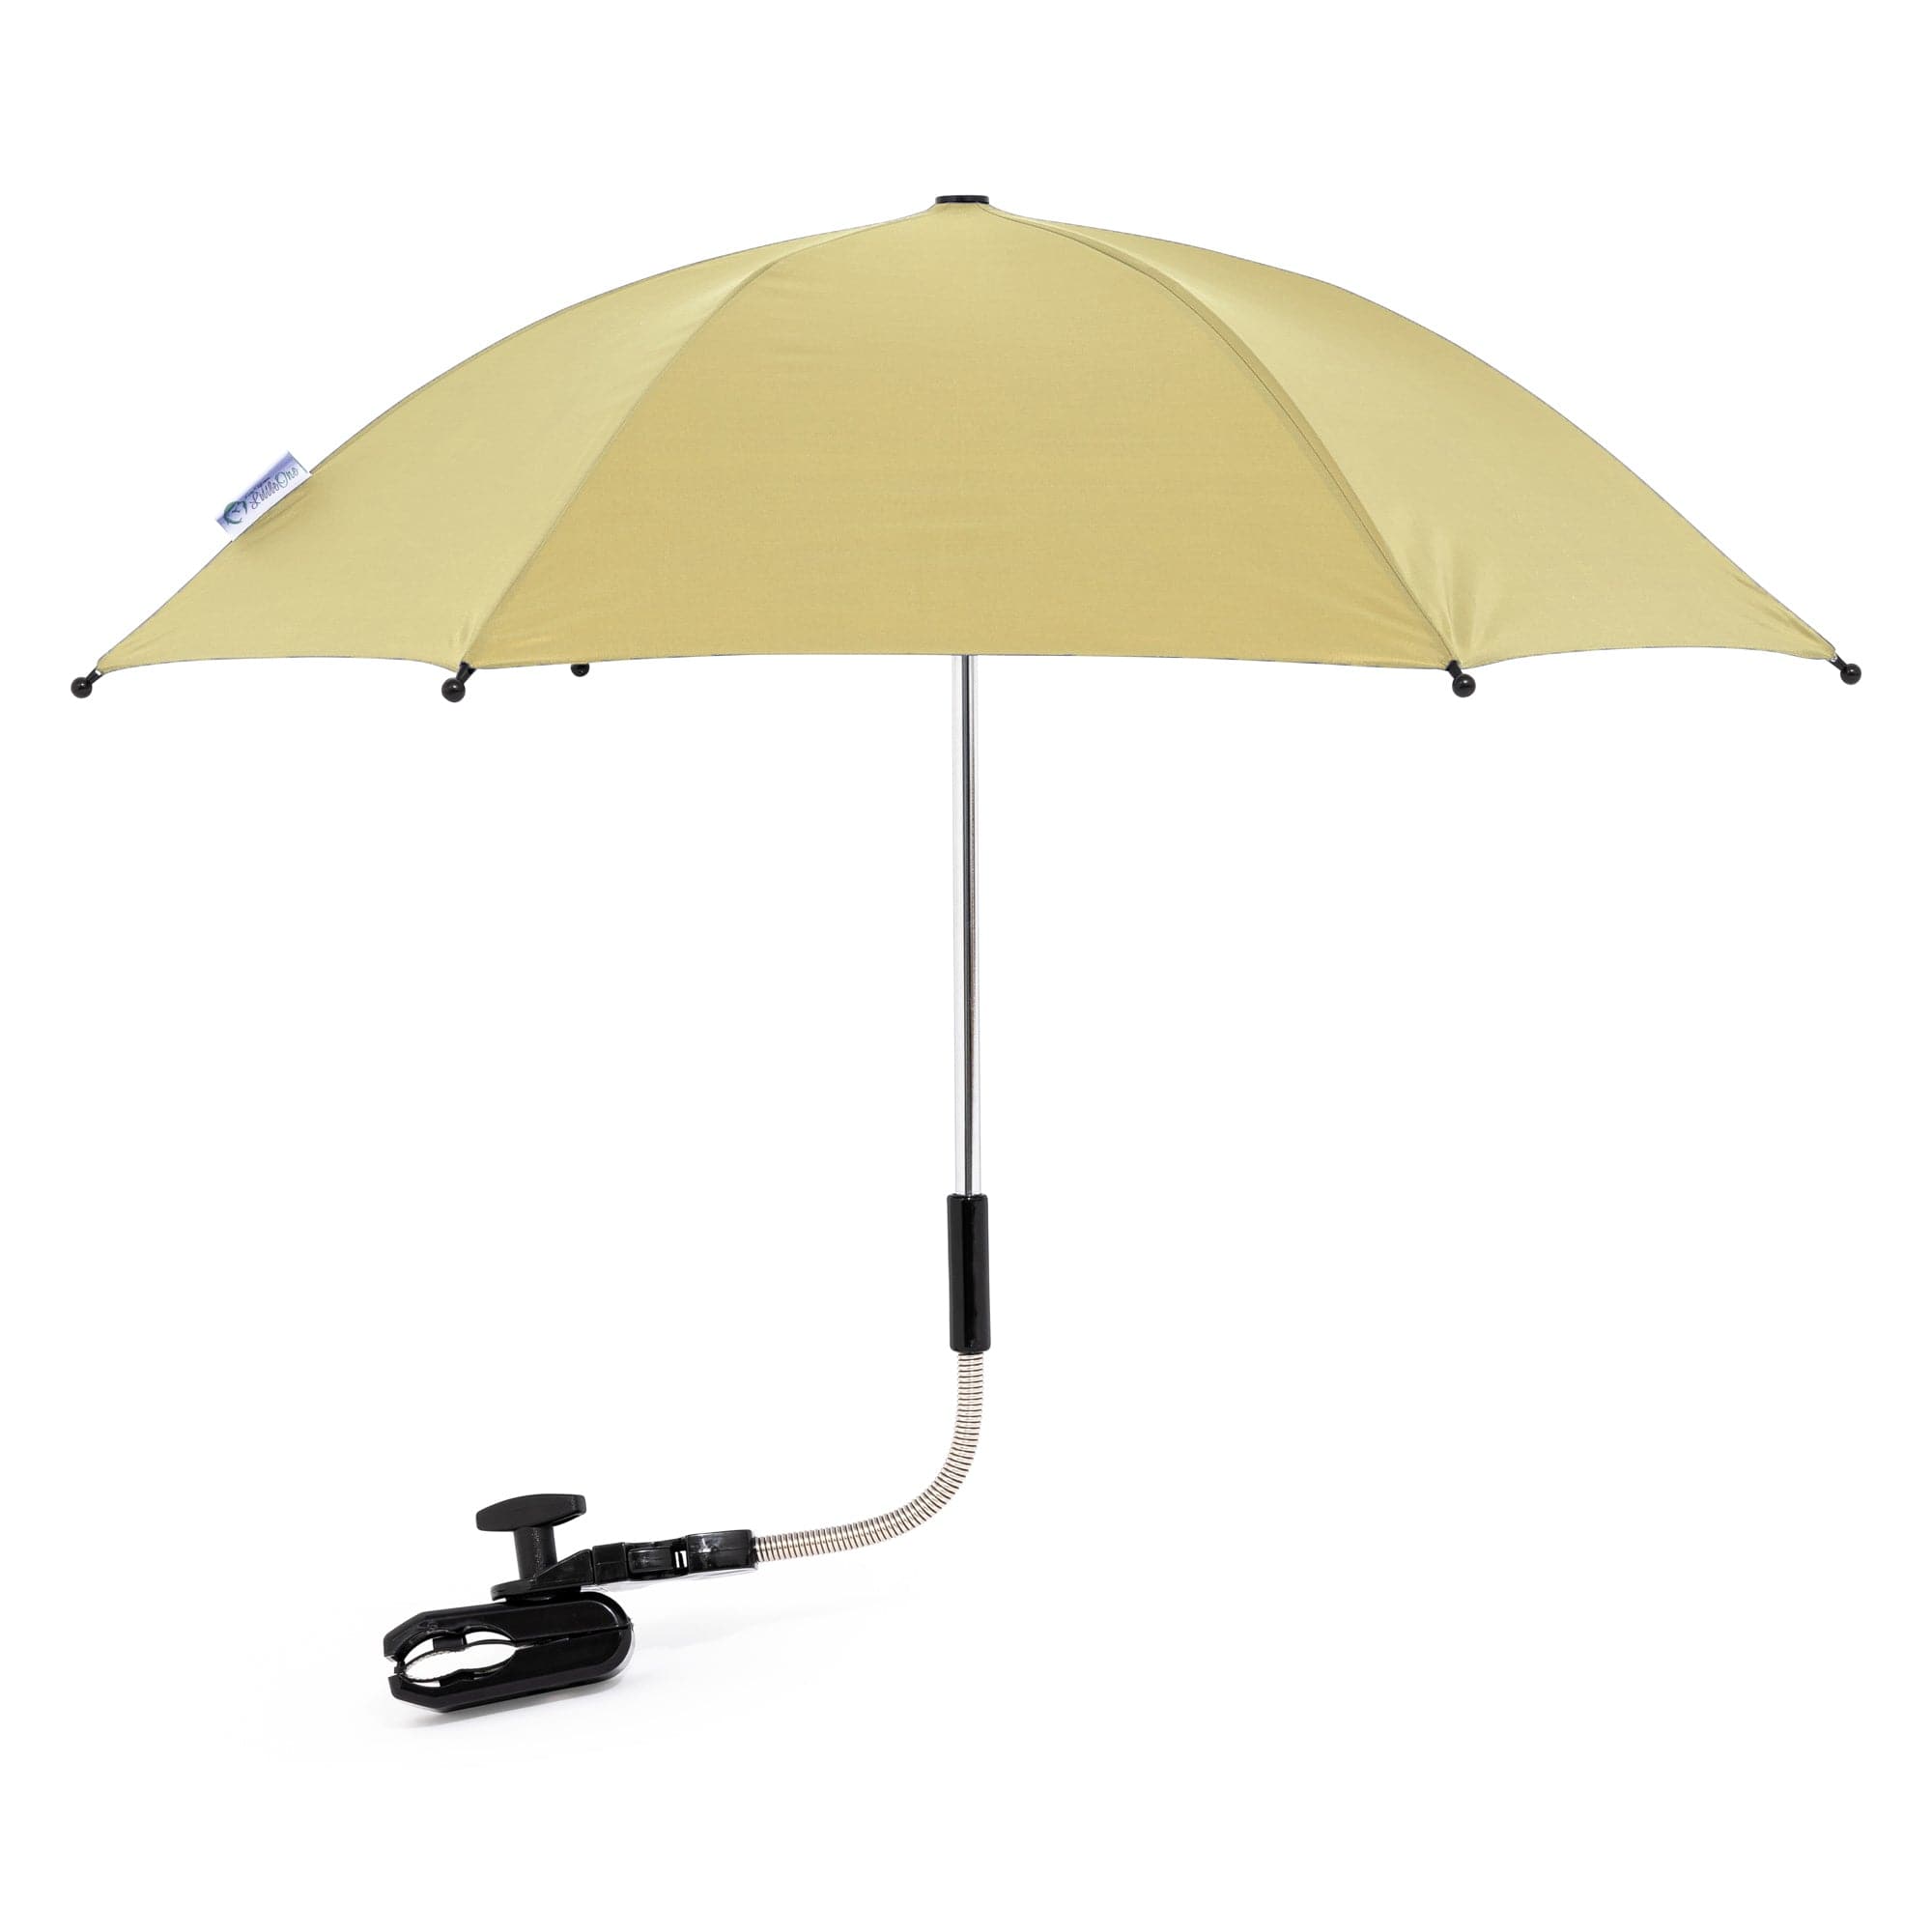 Baby Parasol Compatible With Safety 1st - Fits All Models - For Your Little One